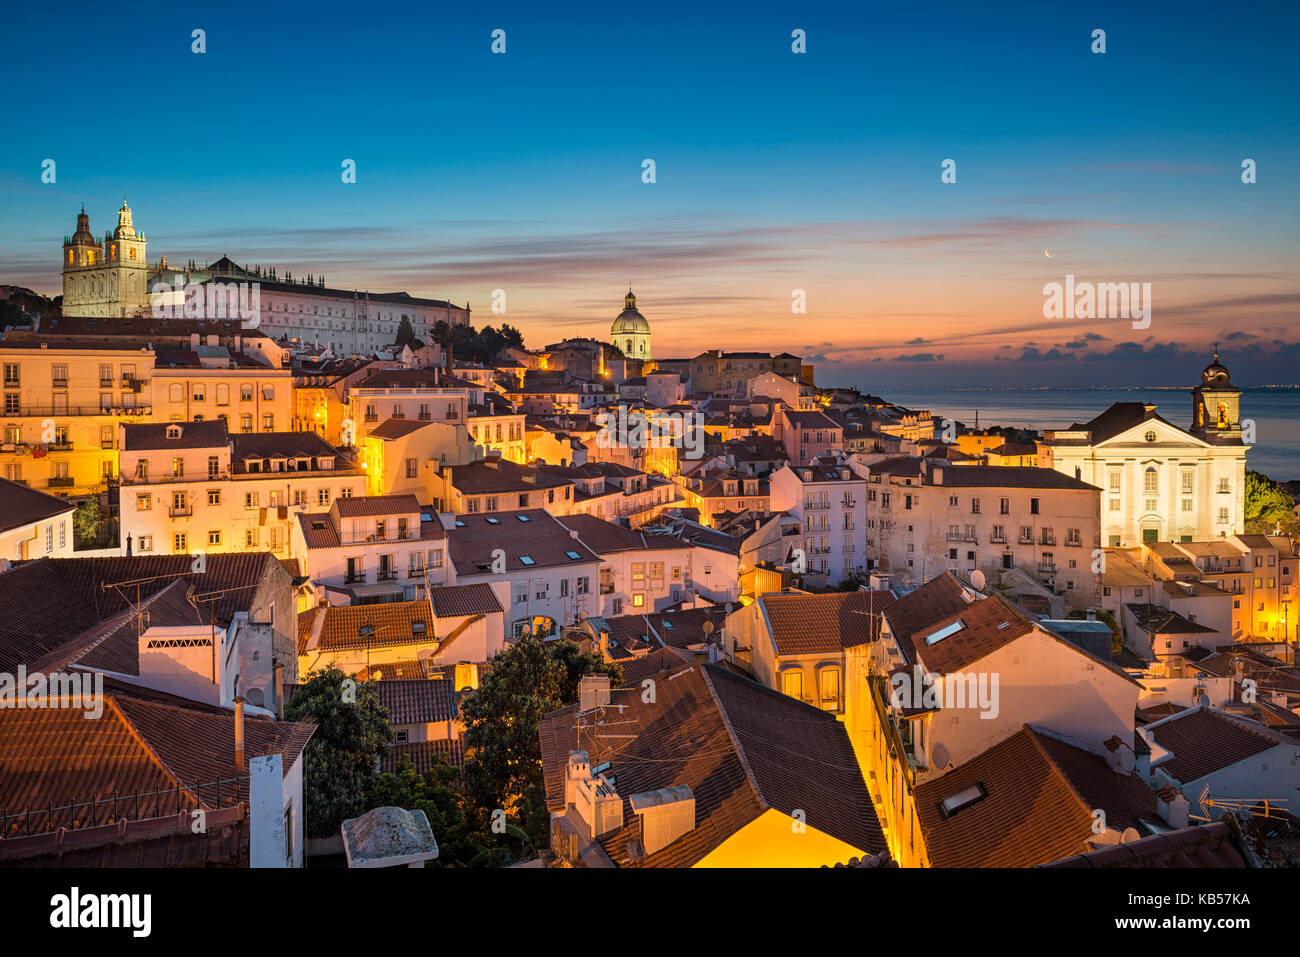 Alfama old town district in Lisbon at night, Portugal Stock Photo